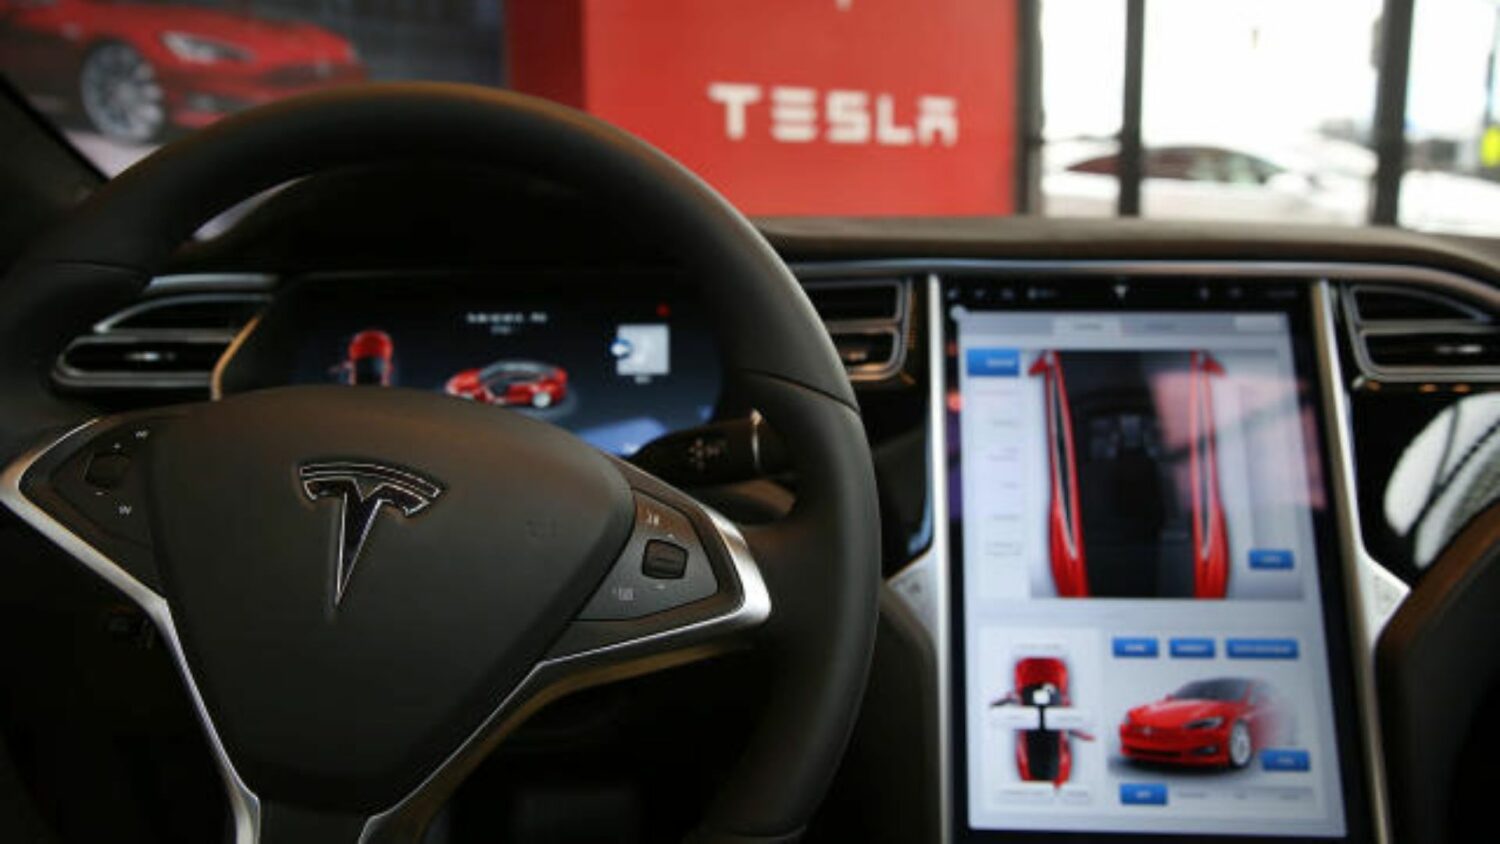 U.S. safety officials are alarmed by Tesla's decision to let certain drivers use its Autopilot driver-assist system for prolonged periods